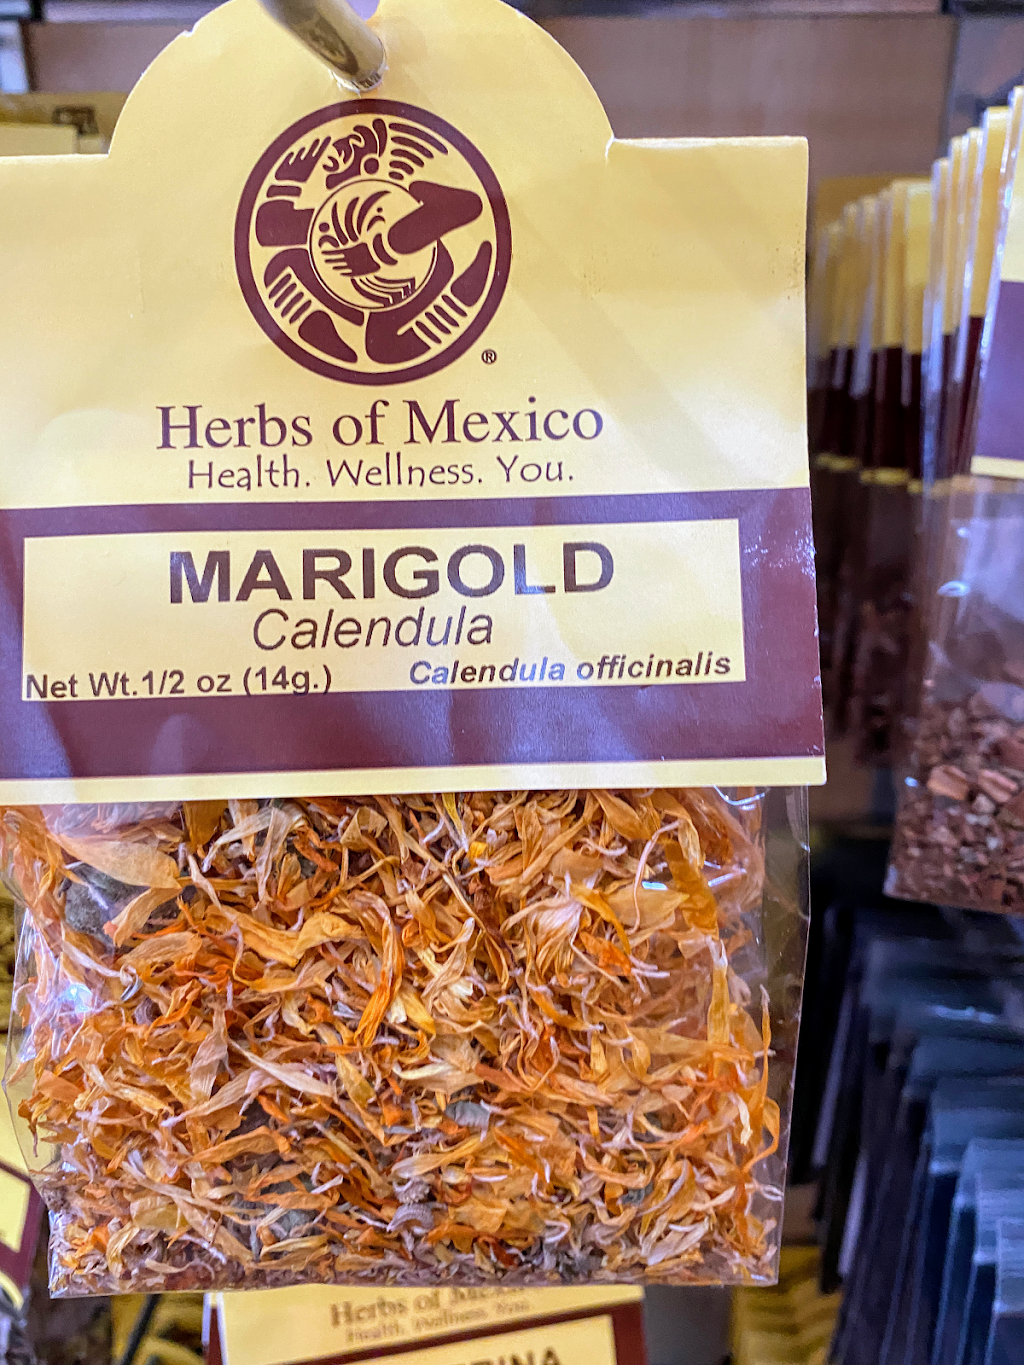 Herbs Of Mexico | 3903 Whittier Blvd, Los Angeles, CA 90023, USA | Phone: (323) 261-2521 ext. 1